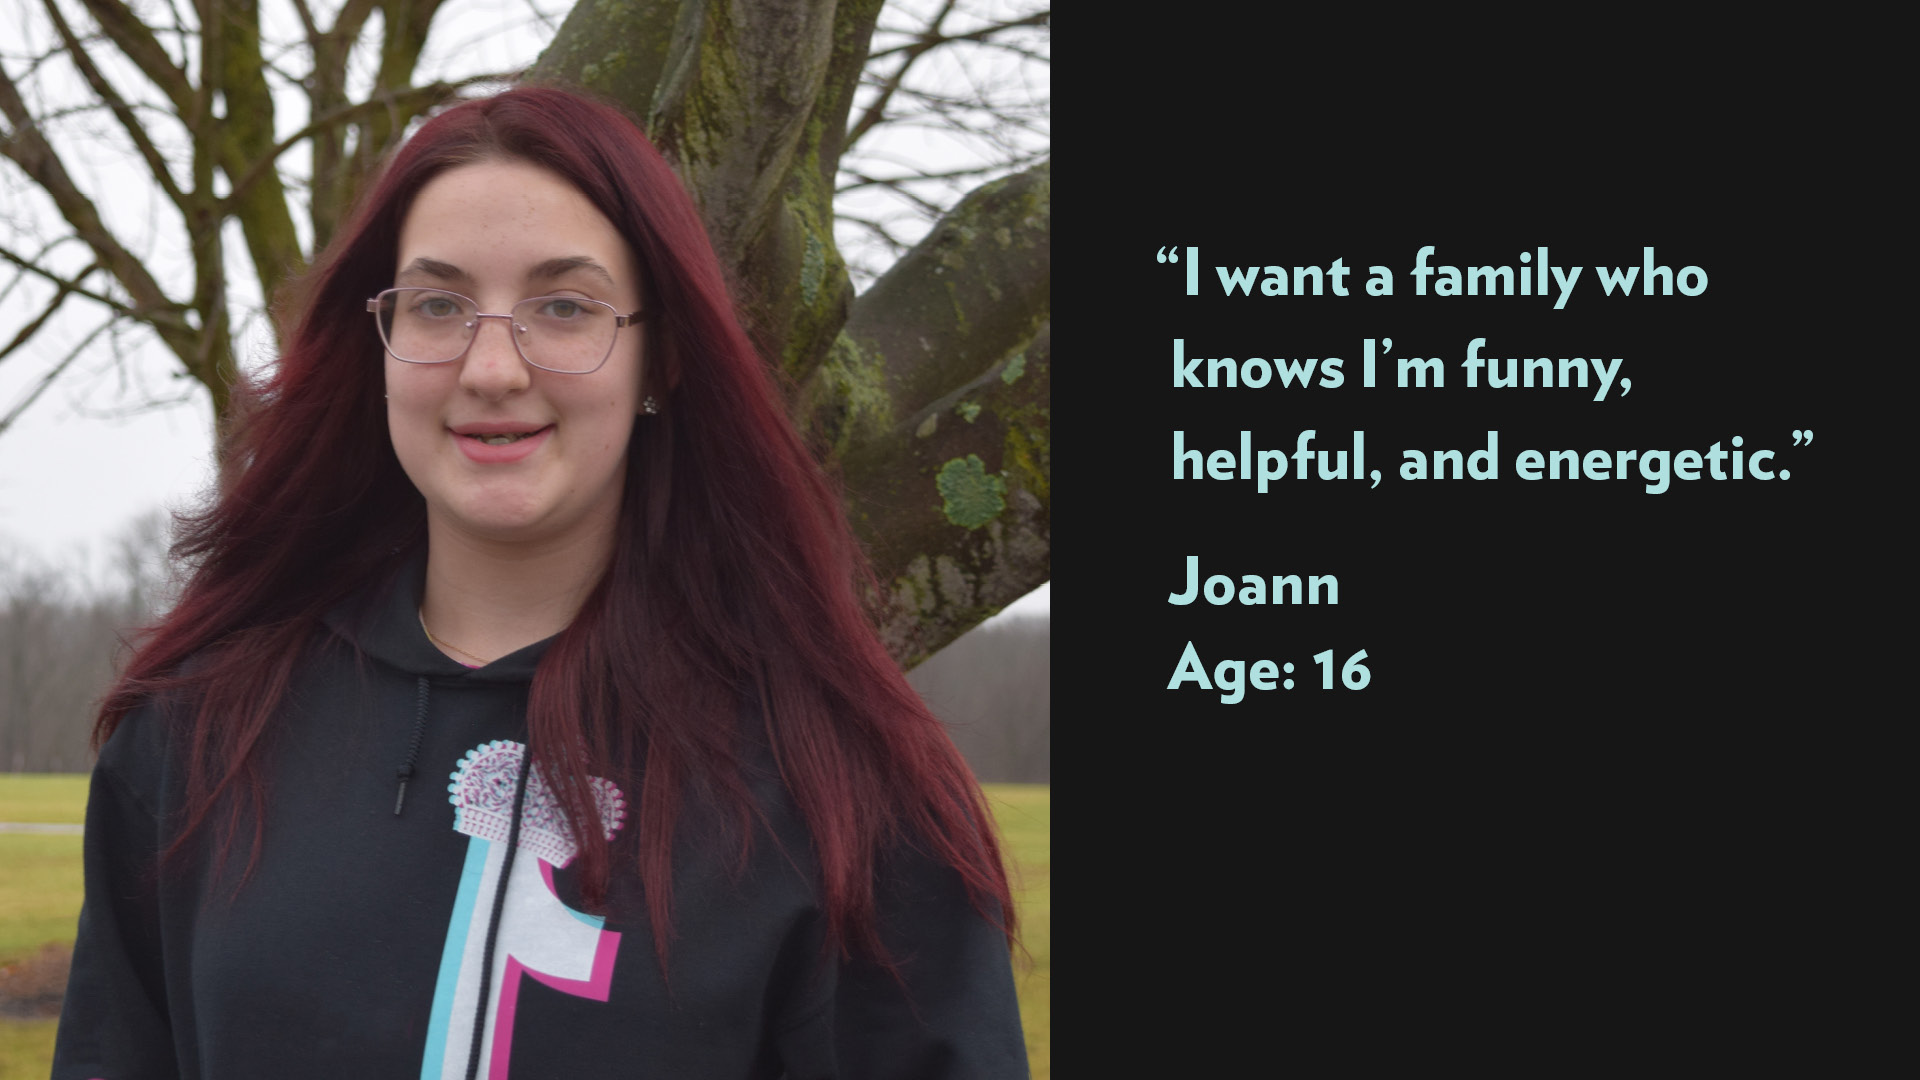 I want a family who knows I’m funny, helpful, and energetic. Joann, age 16.